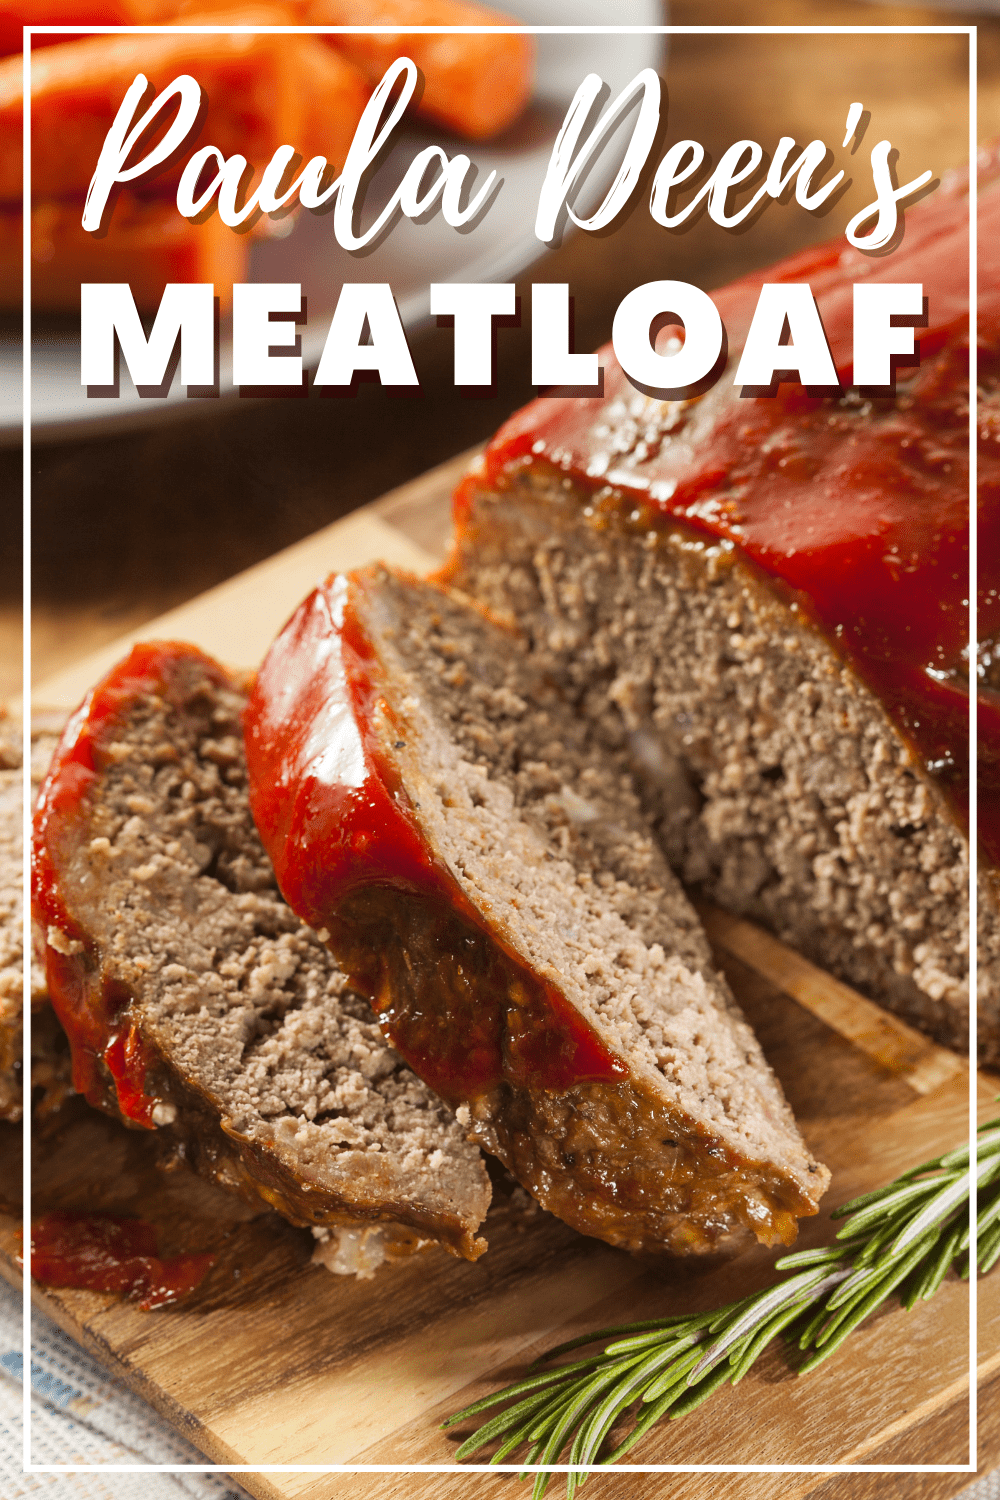 Paula Deen S Meatloaf Insanely Good Free Nude Porn Photos